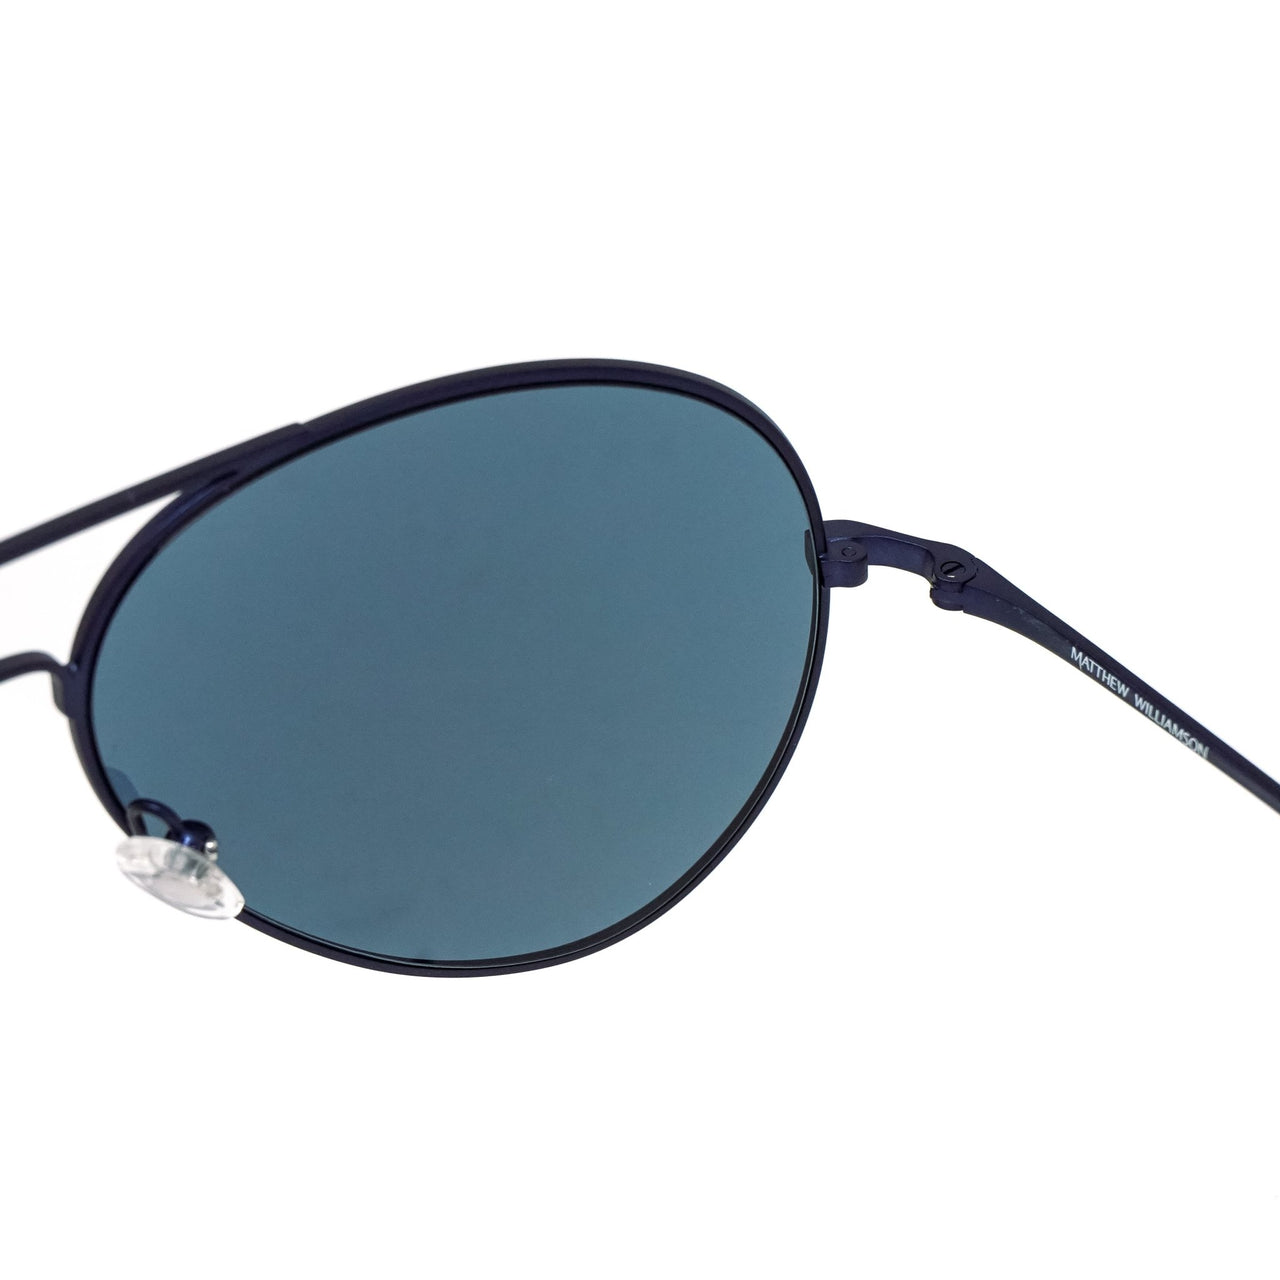 Matthew Williamson Sunglasses Black and Blue - Watches & Crystals